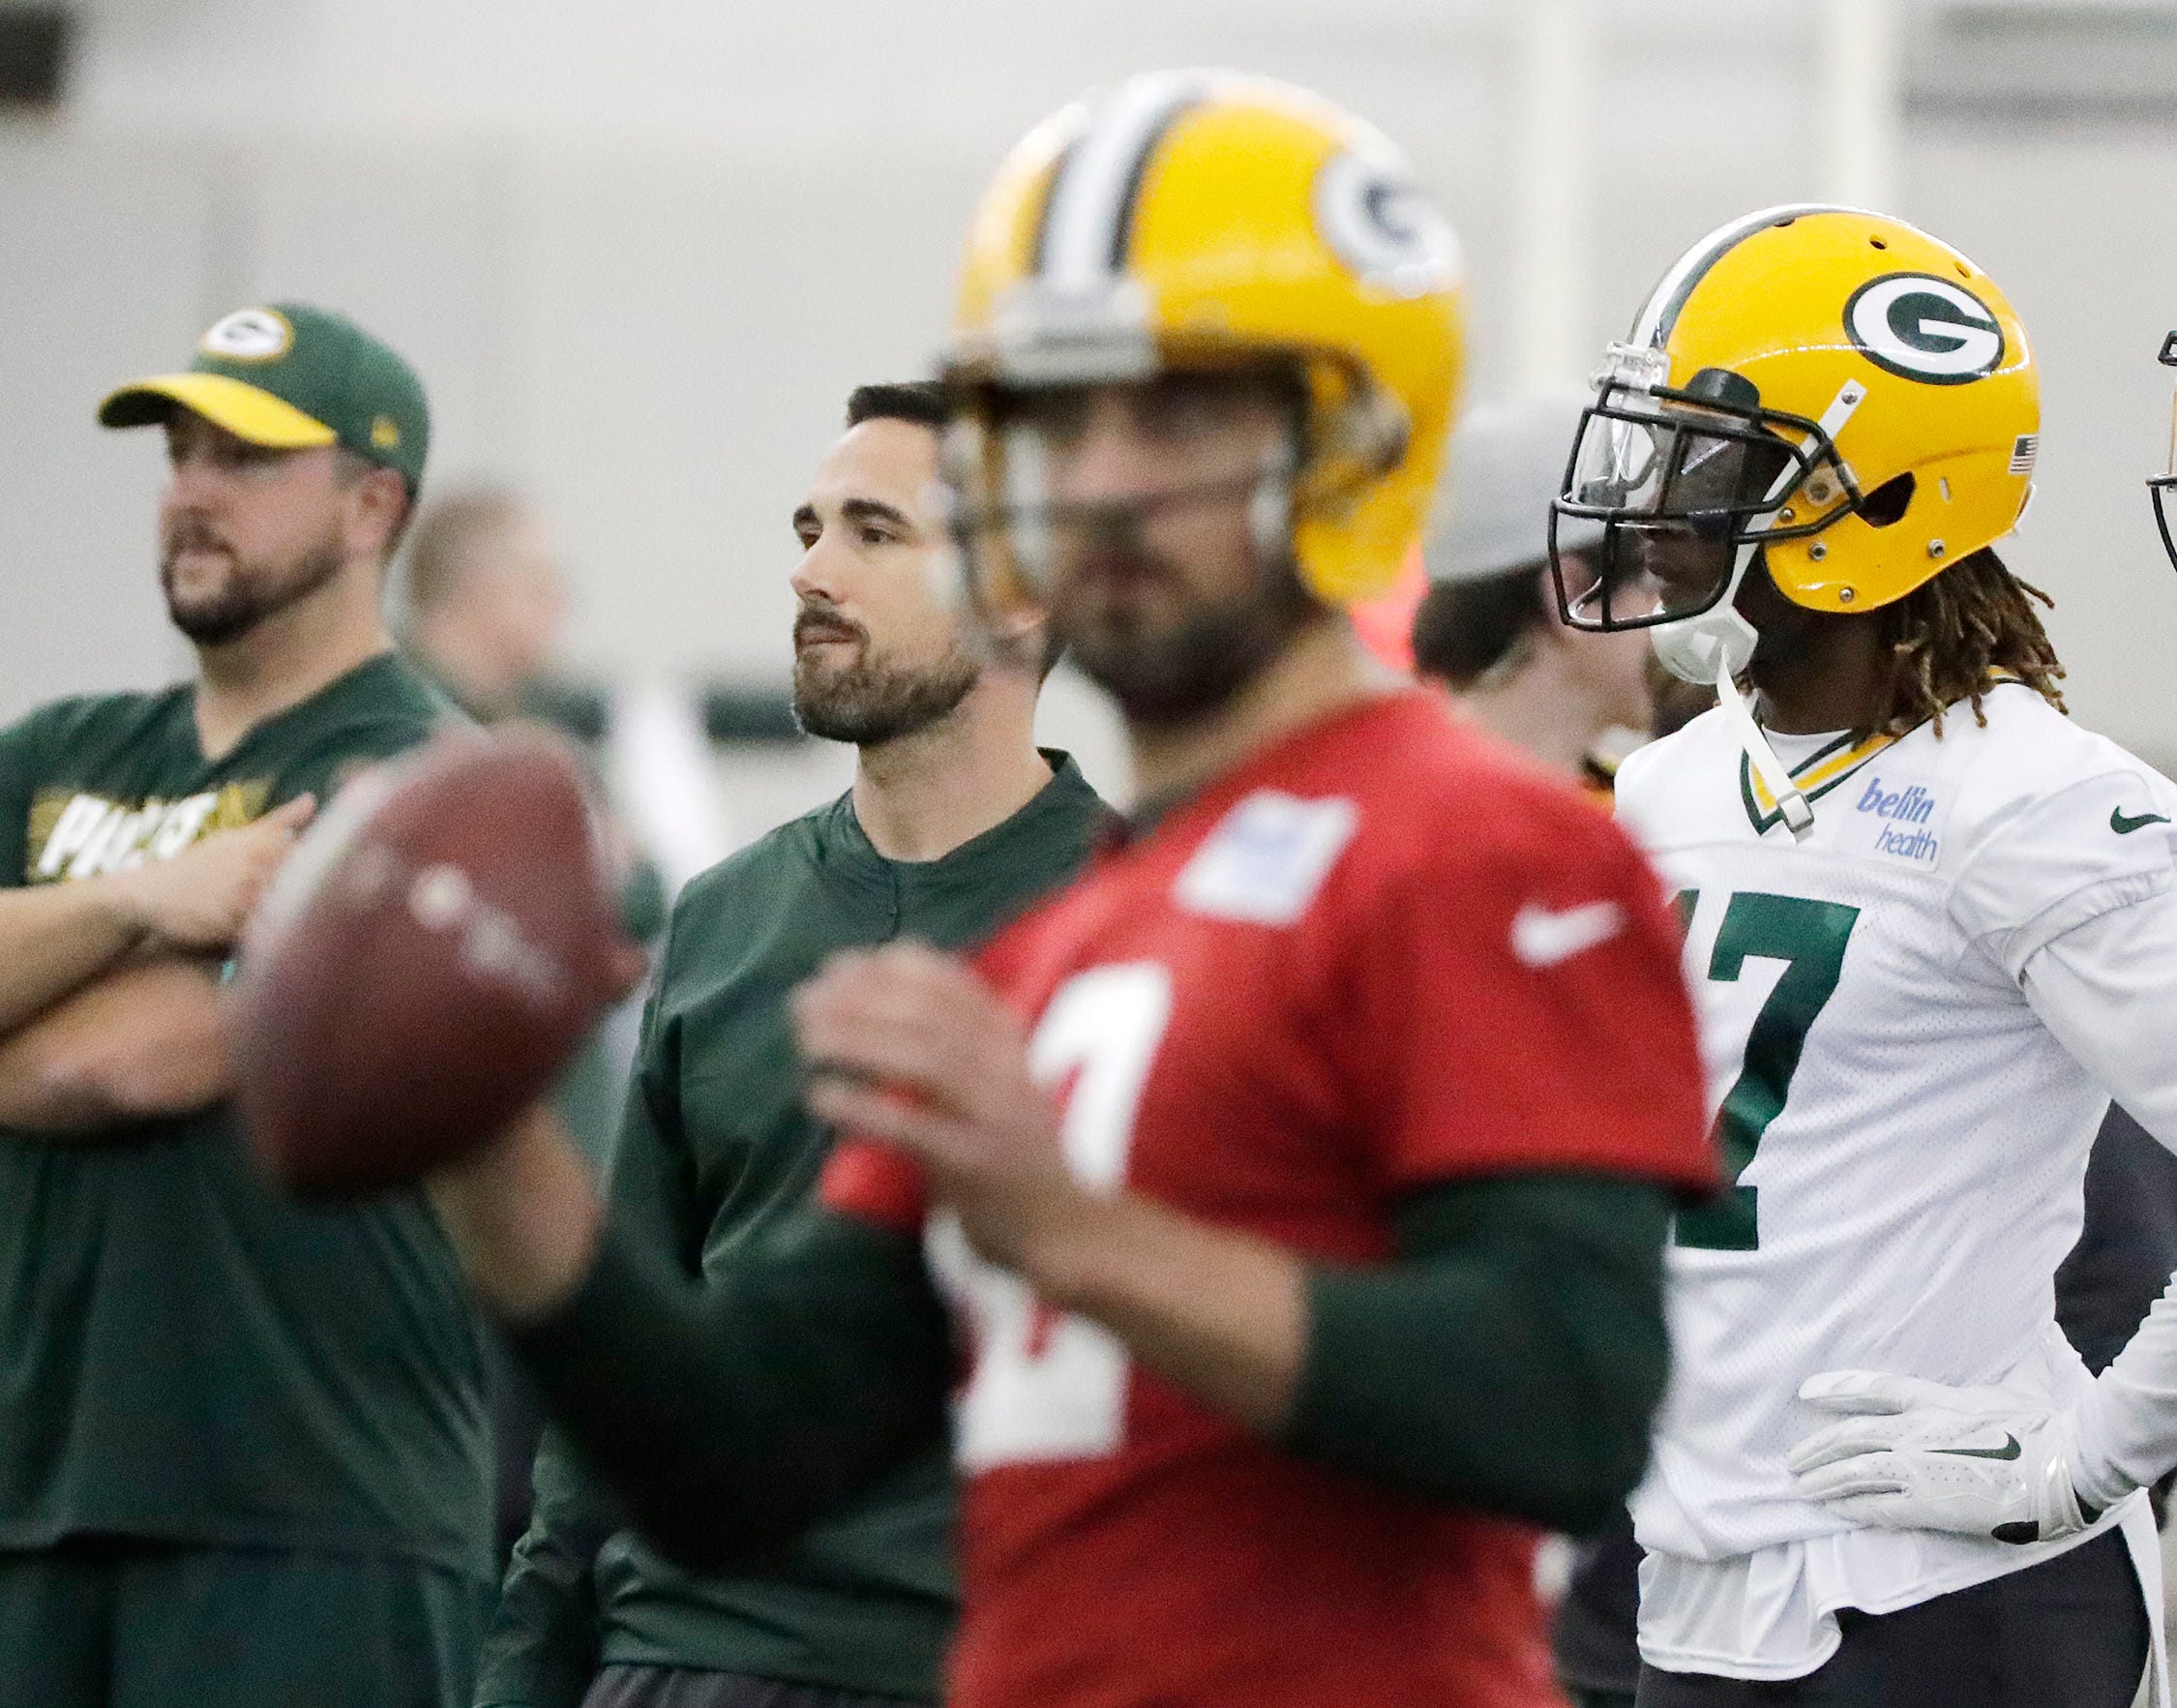 Green Bay Packers head coach Matt LaFleur watches an offensive drill during a team practice at the Don Hutson Center on Wednesday, April 24, 2019 in Ashwaubenon, Wis.